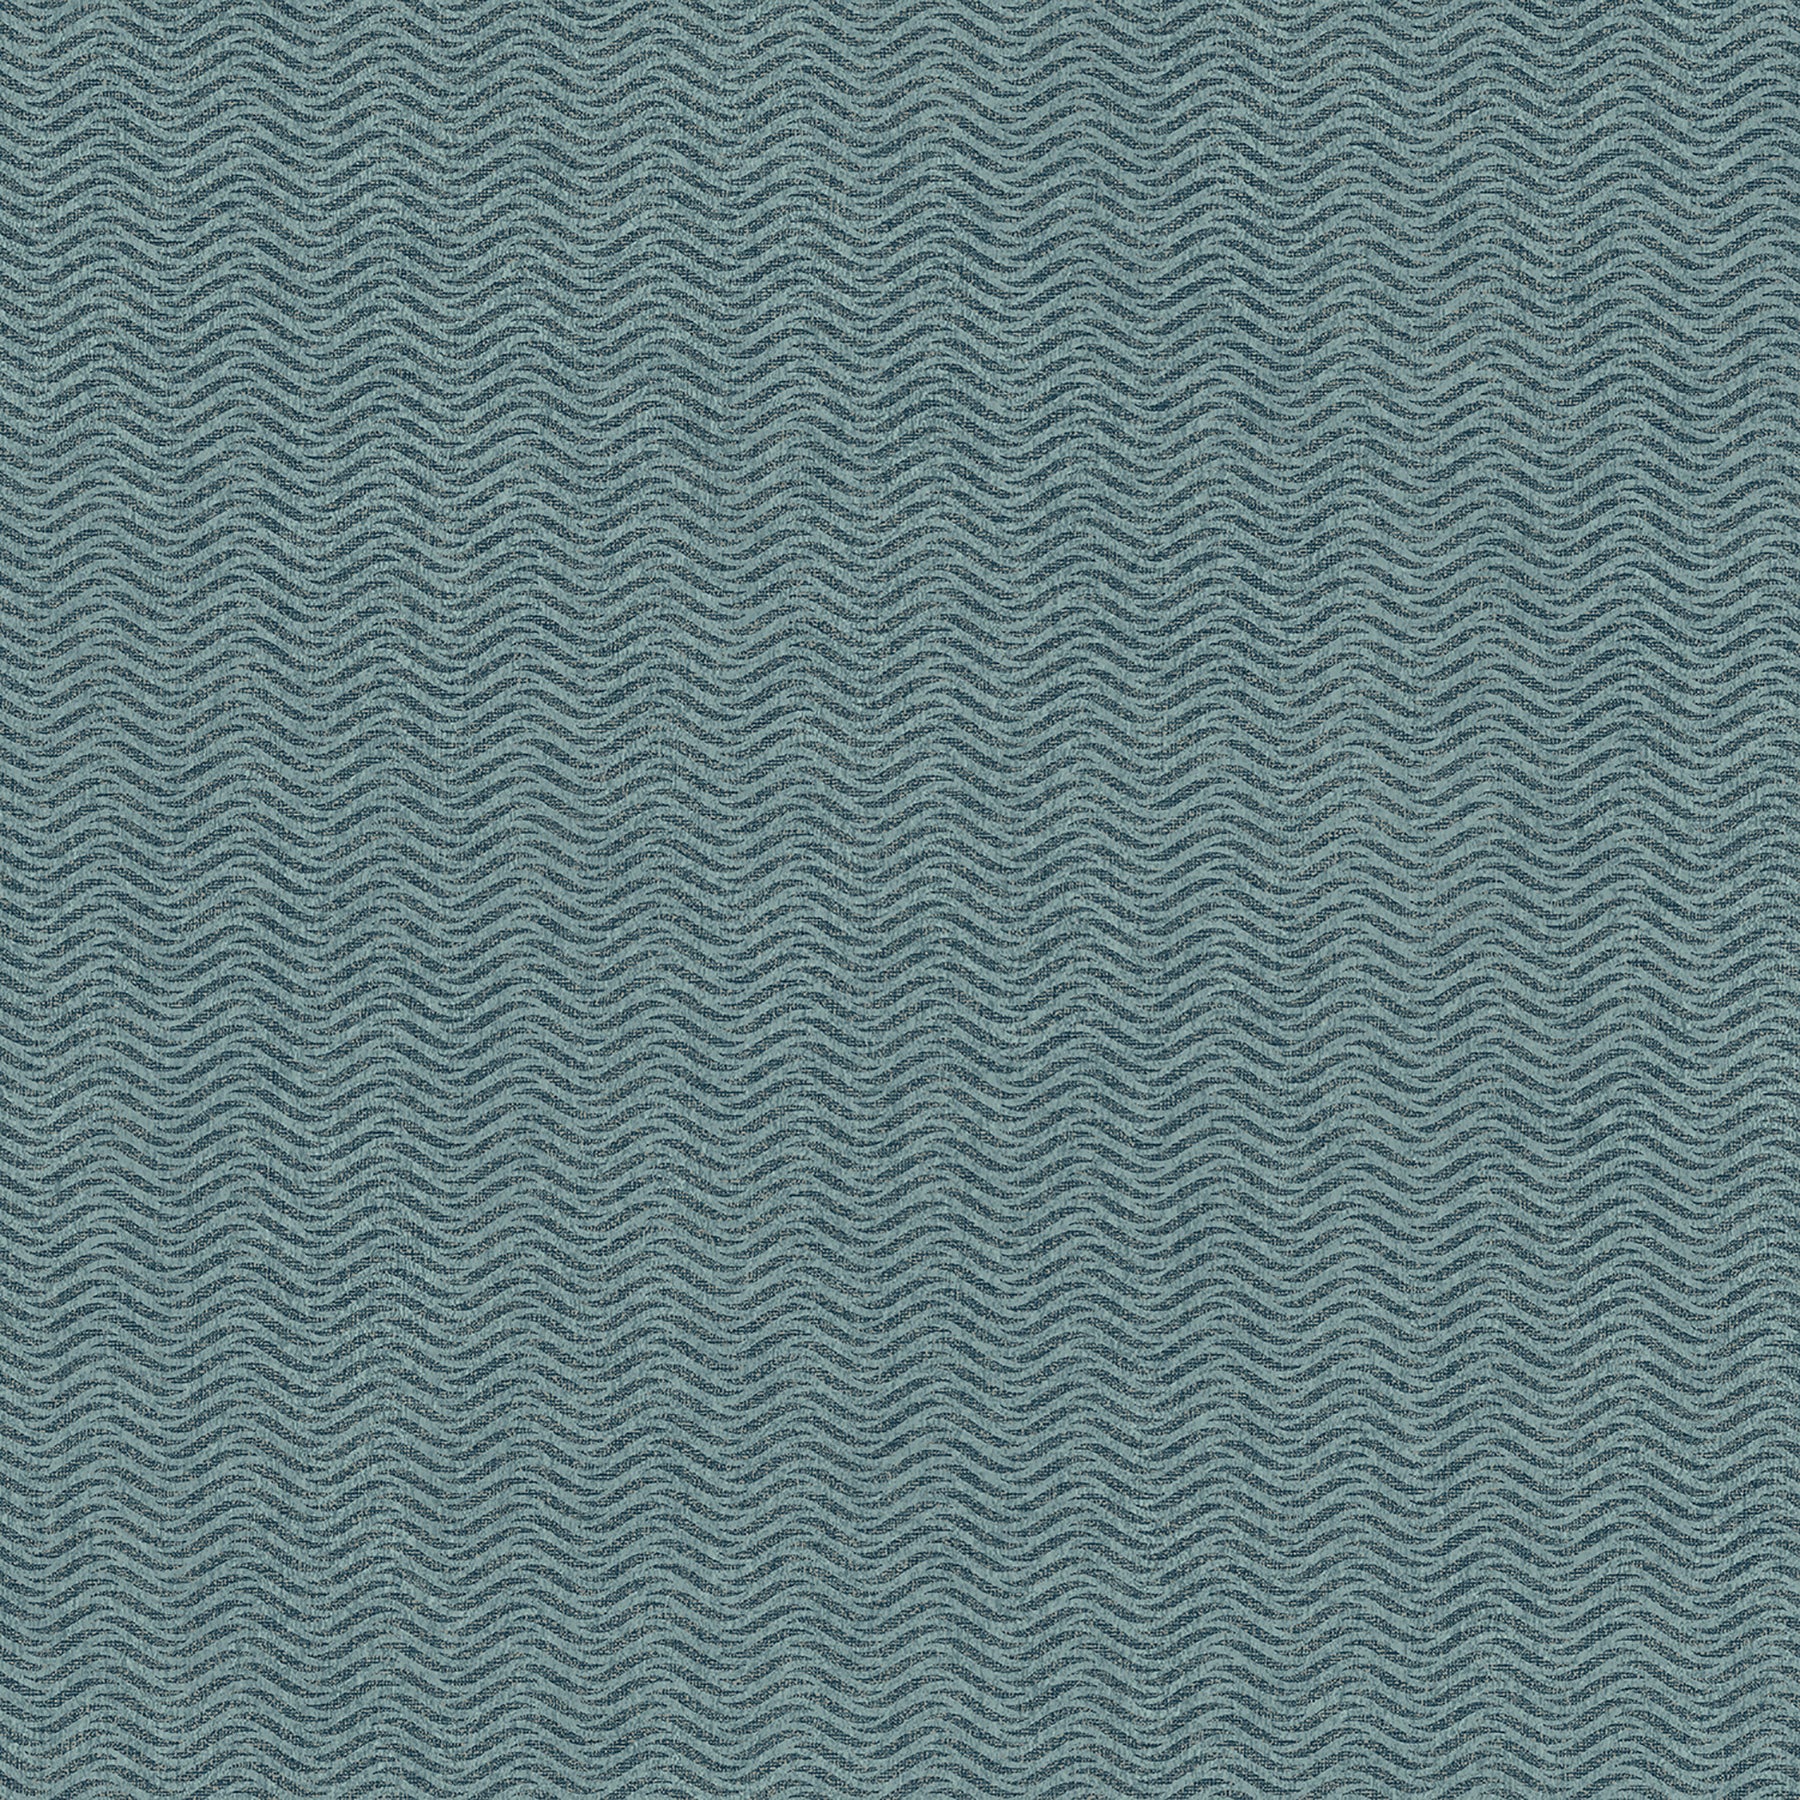 Select 4020-75901 Geo & Textures Jude Teal Woven Waves Teal by Advantage